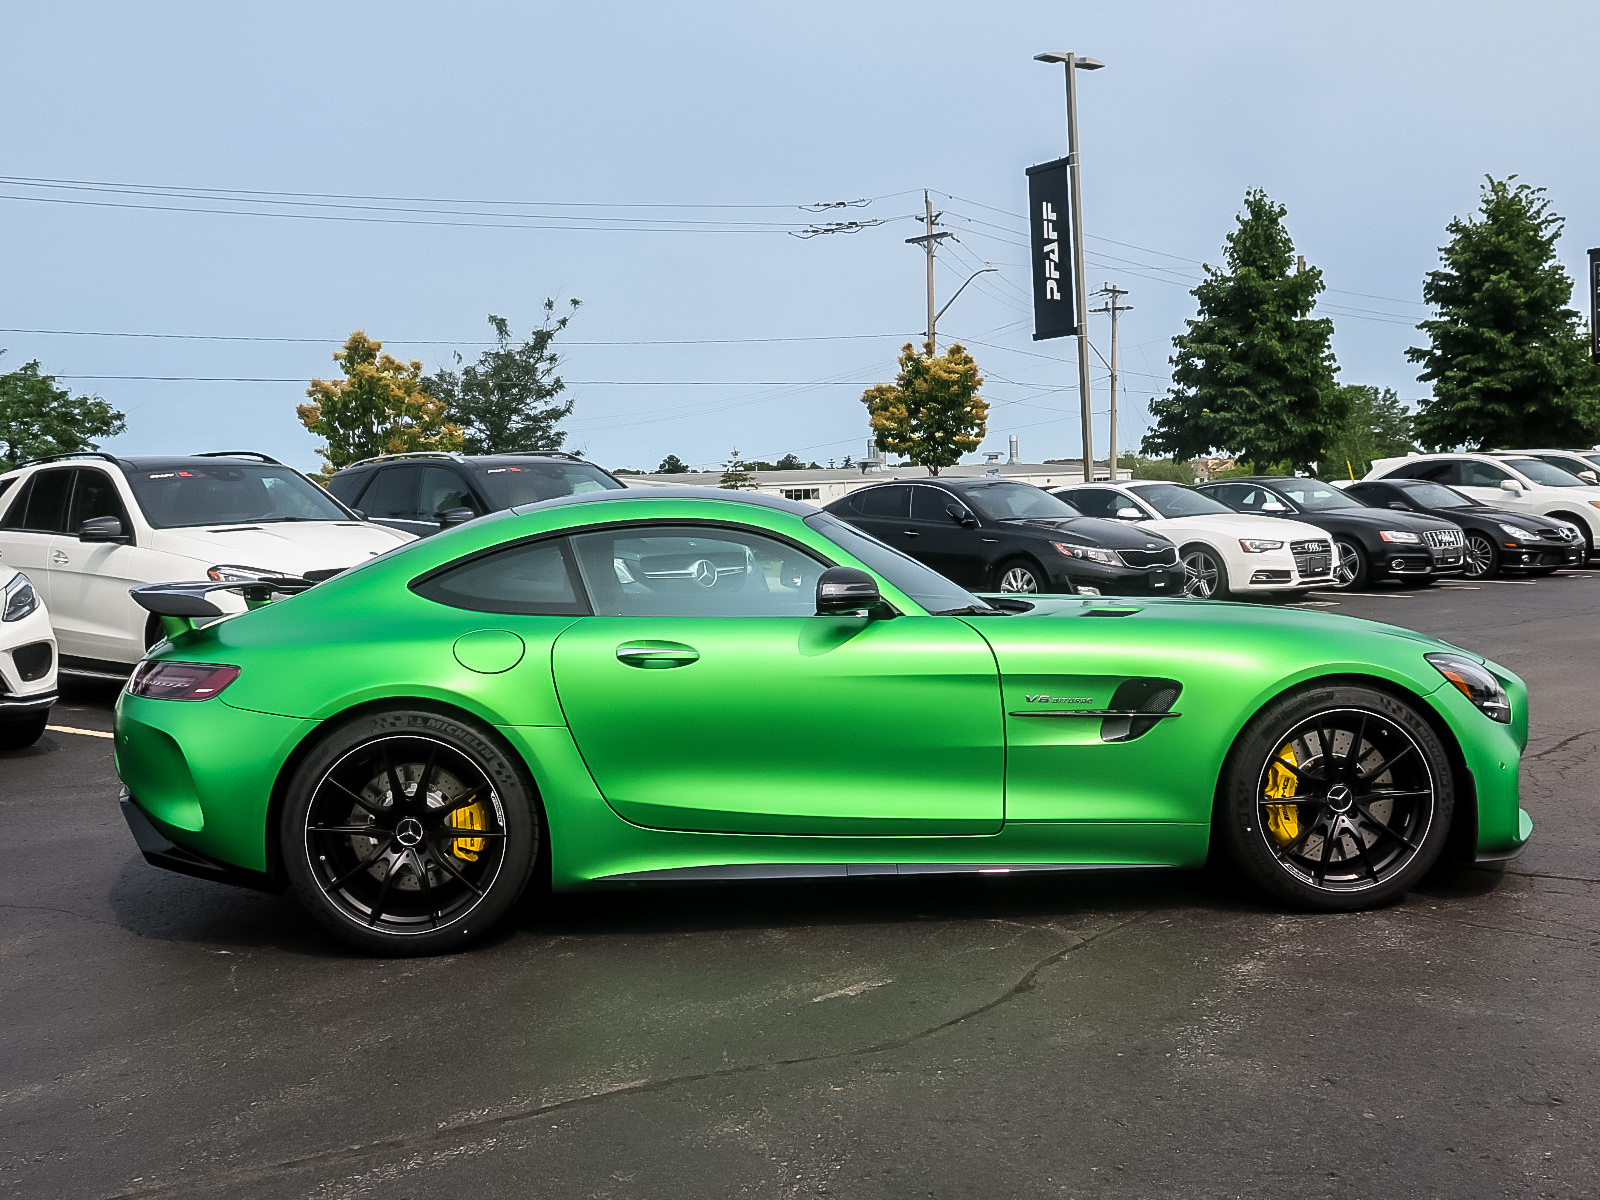 Amg Gtr Albumccars Cars Images Collection